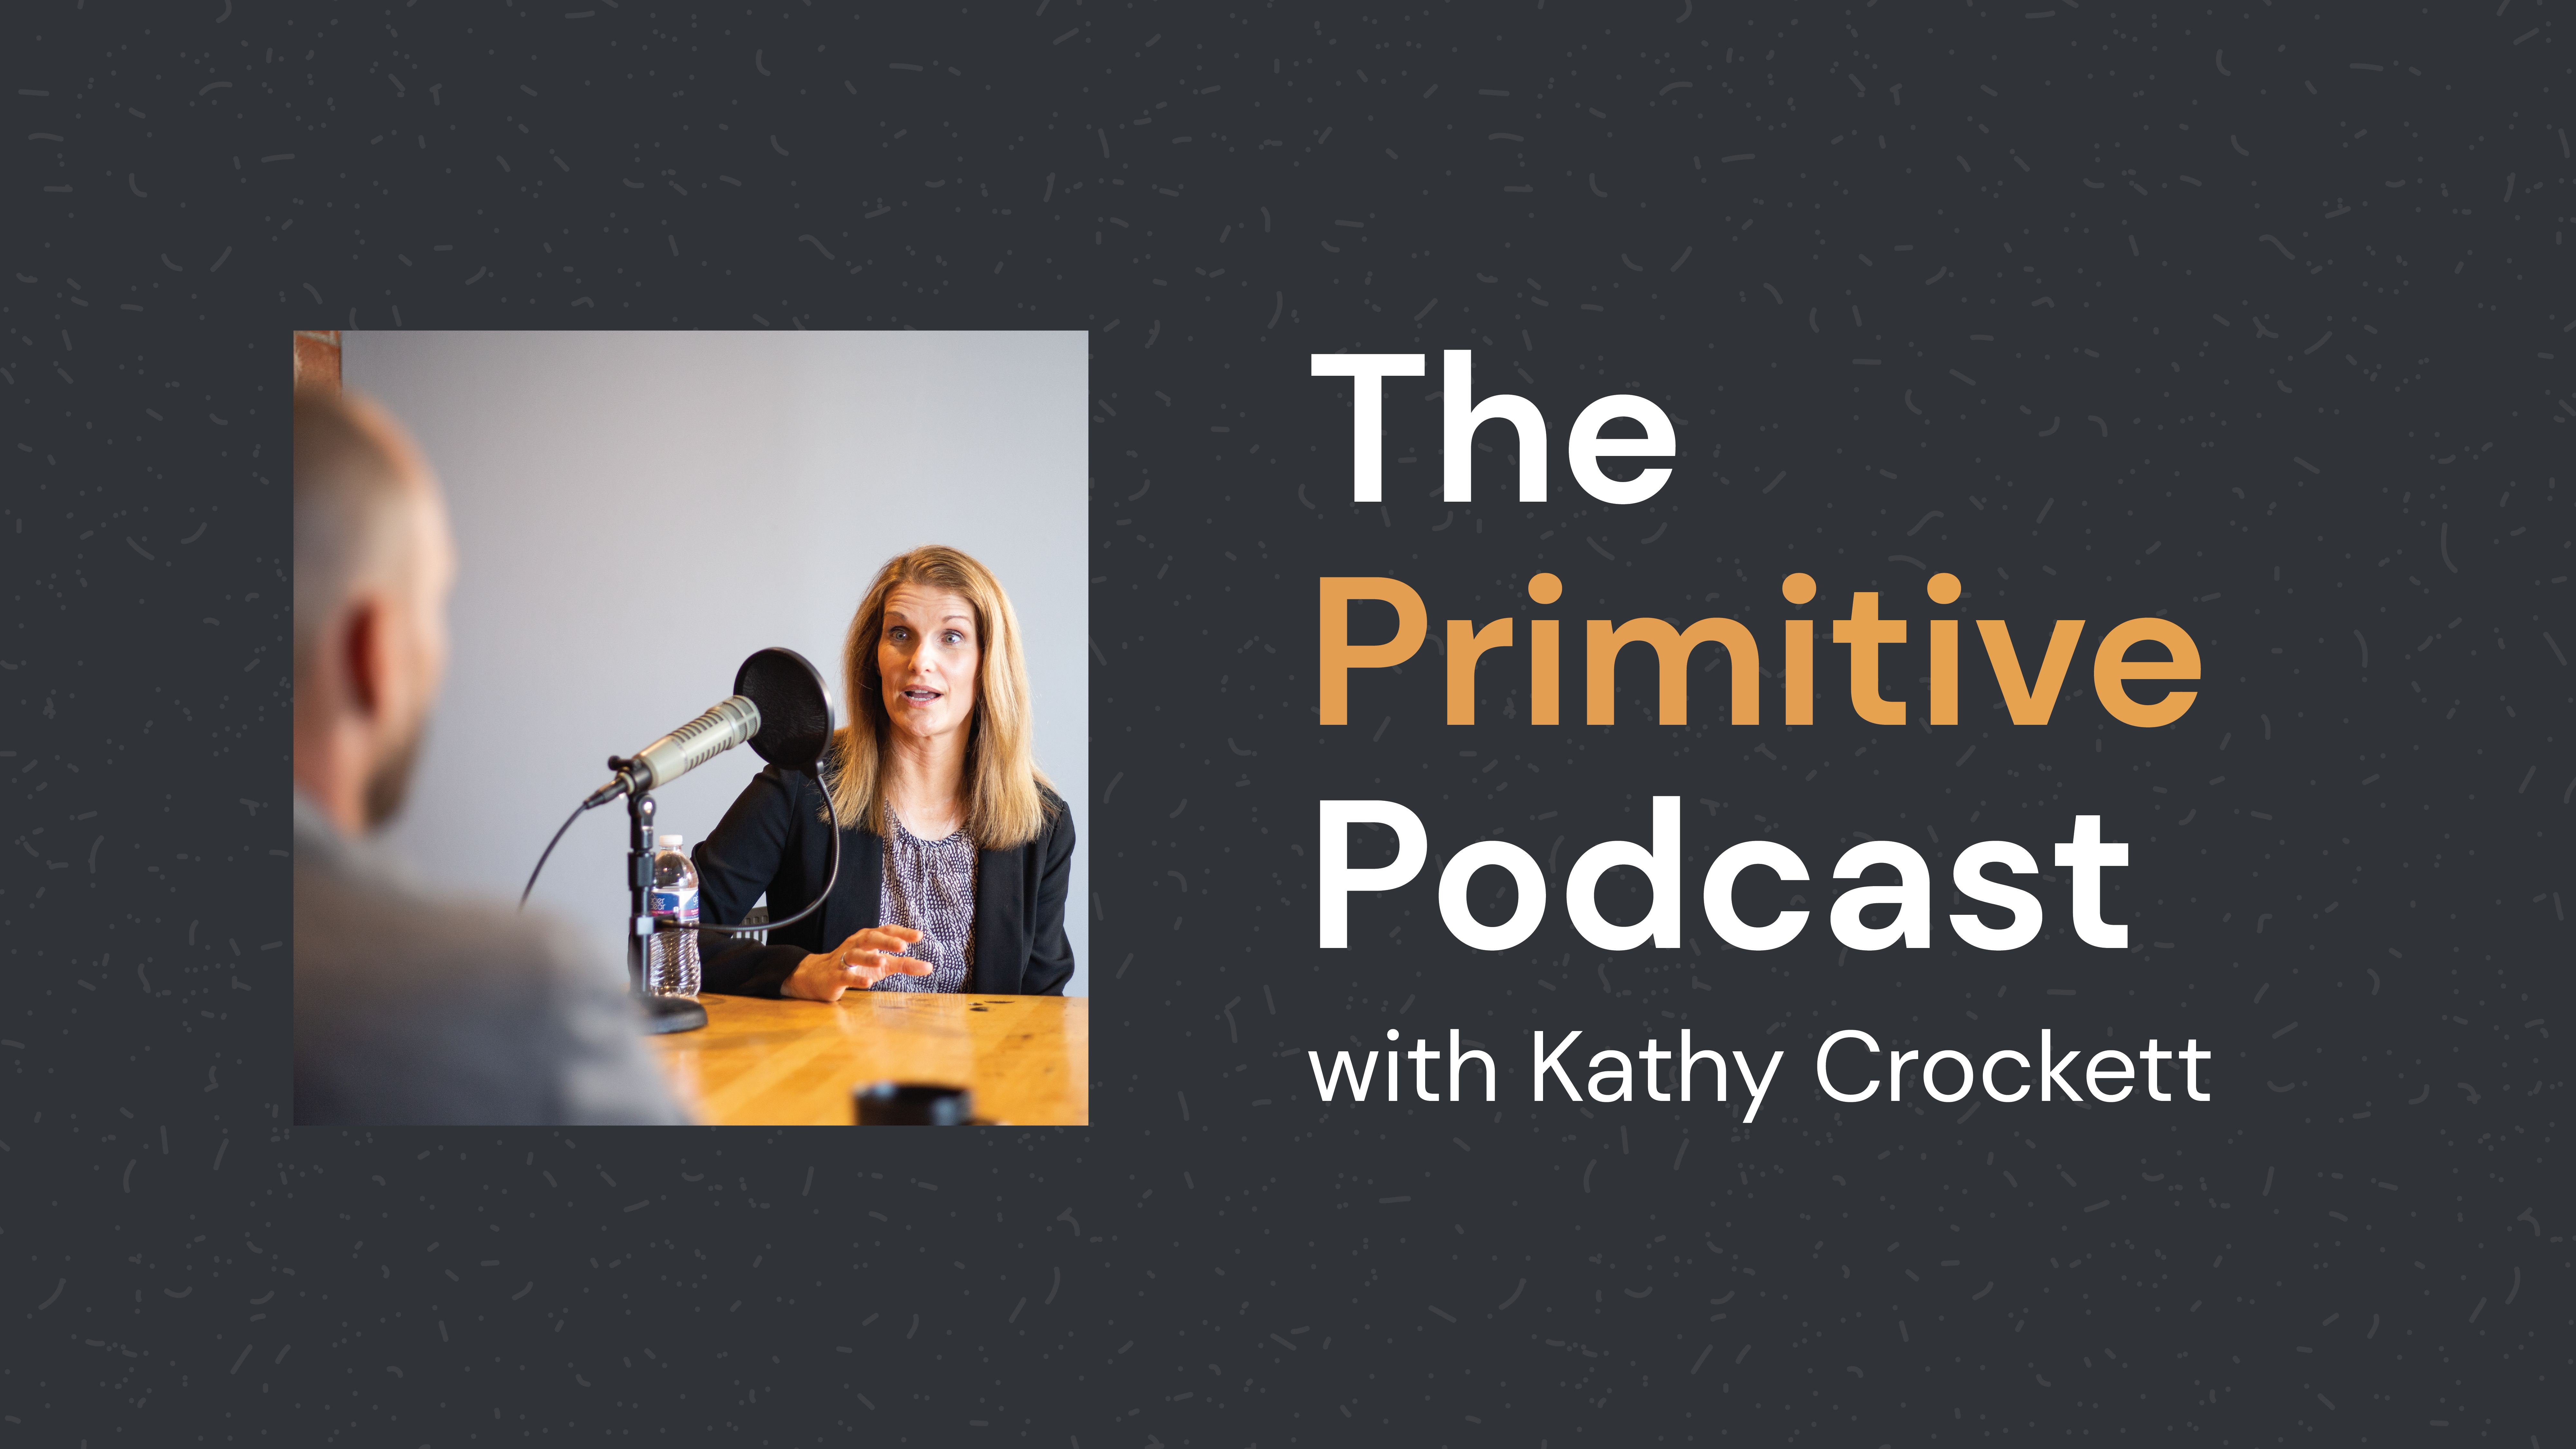 The Primitive Podcast with Kathy Crockett